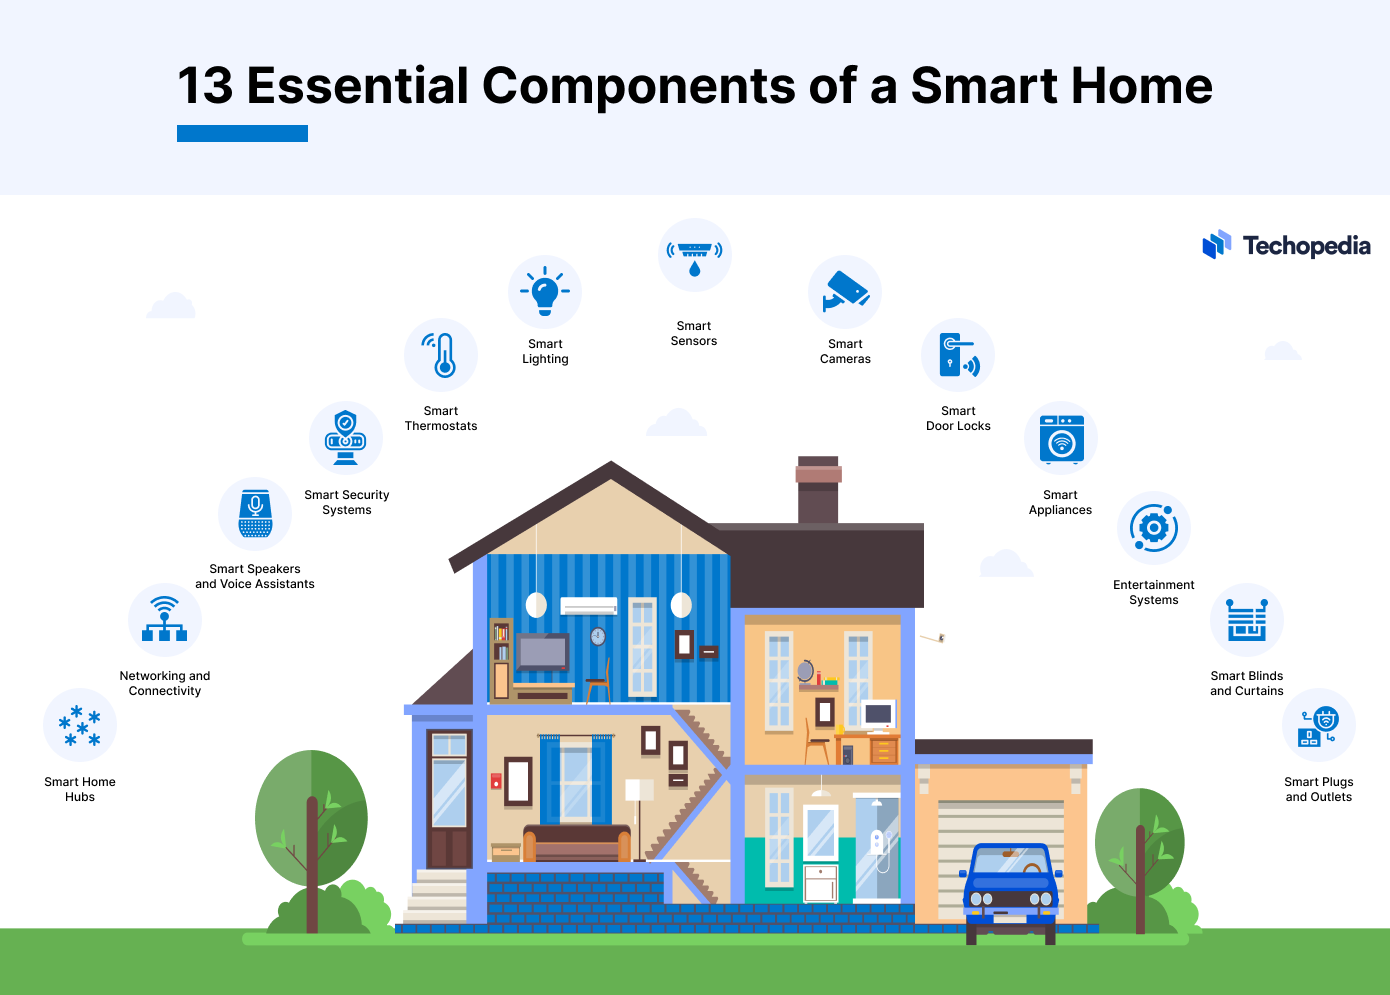 13 Essential Components of a Smart Home